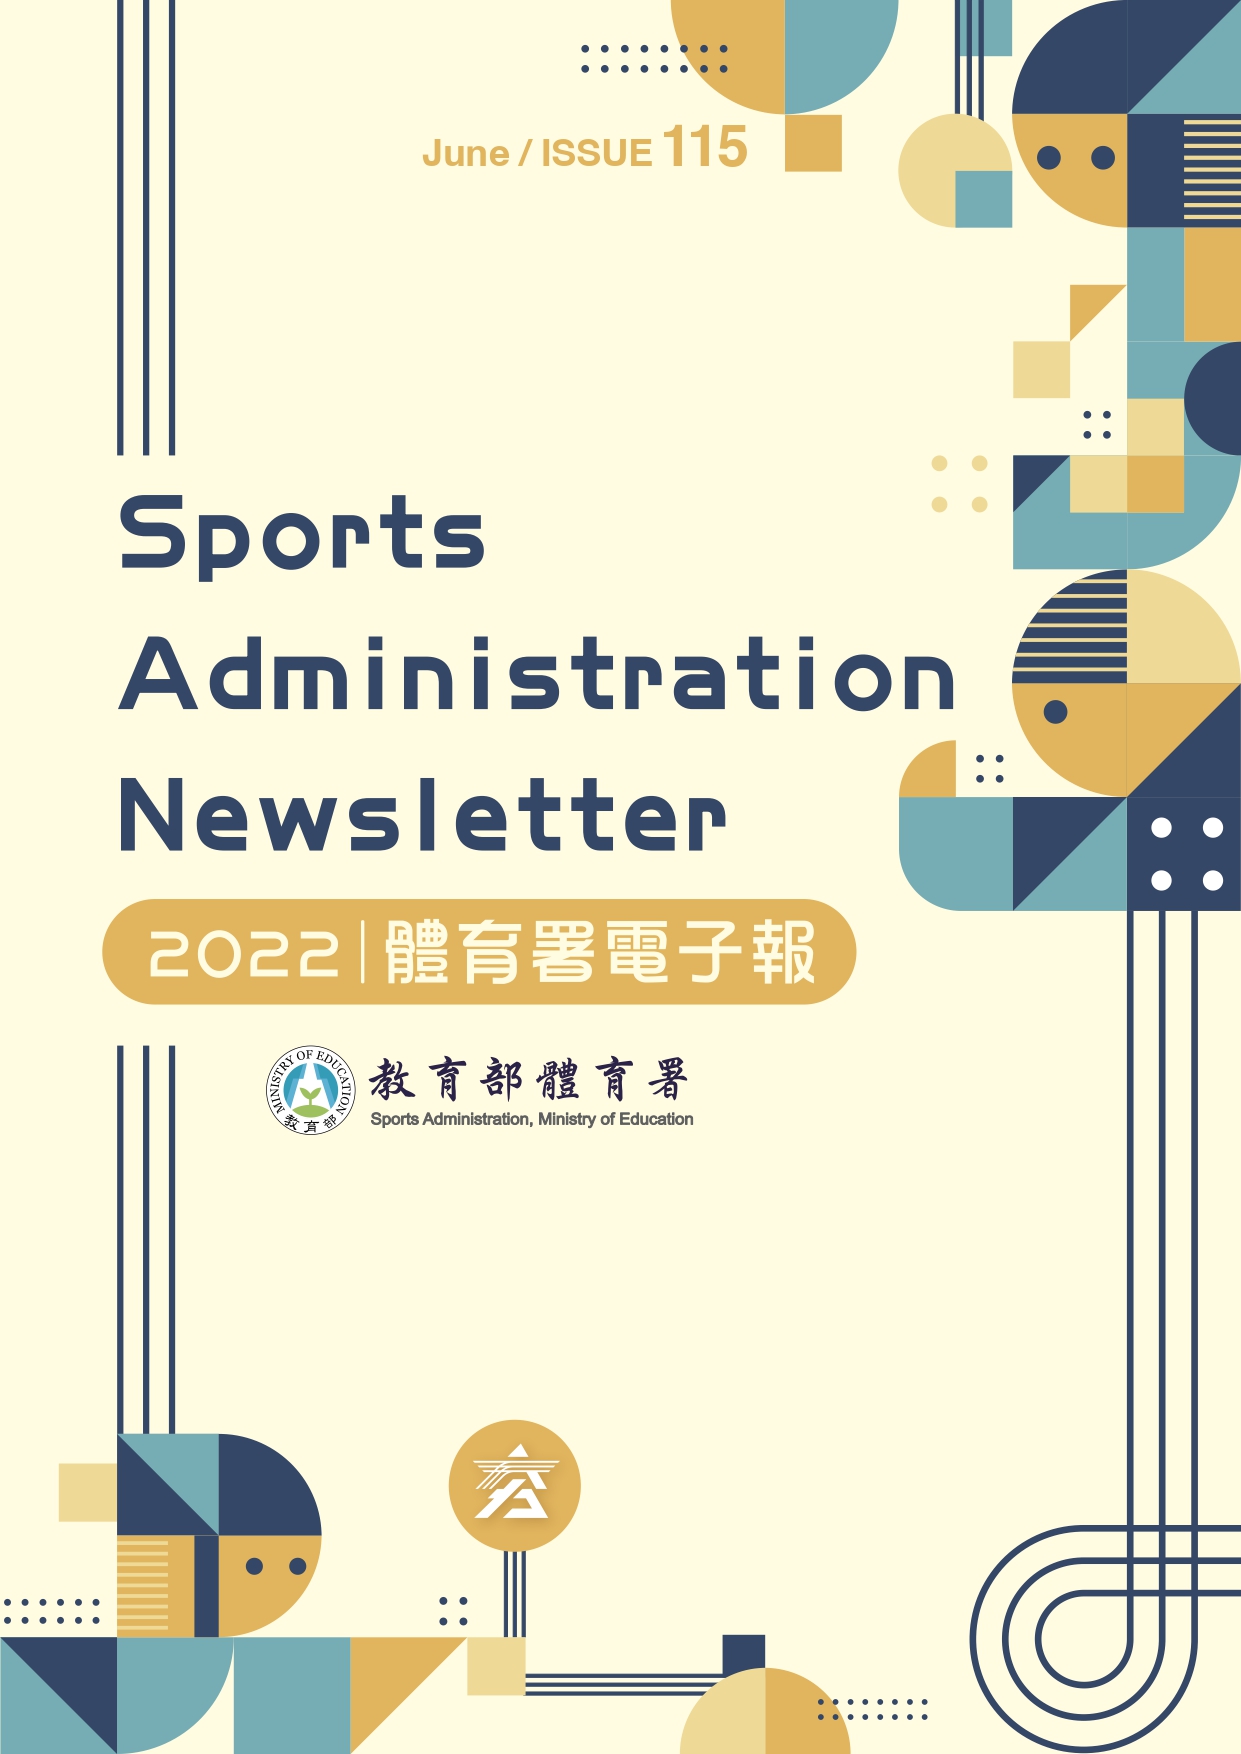 Sports Administration Newsletter #115 June 2022 (19 pages)